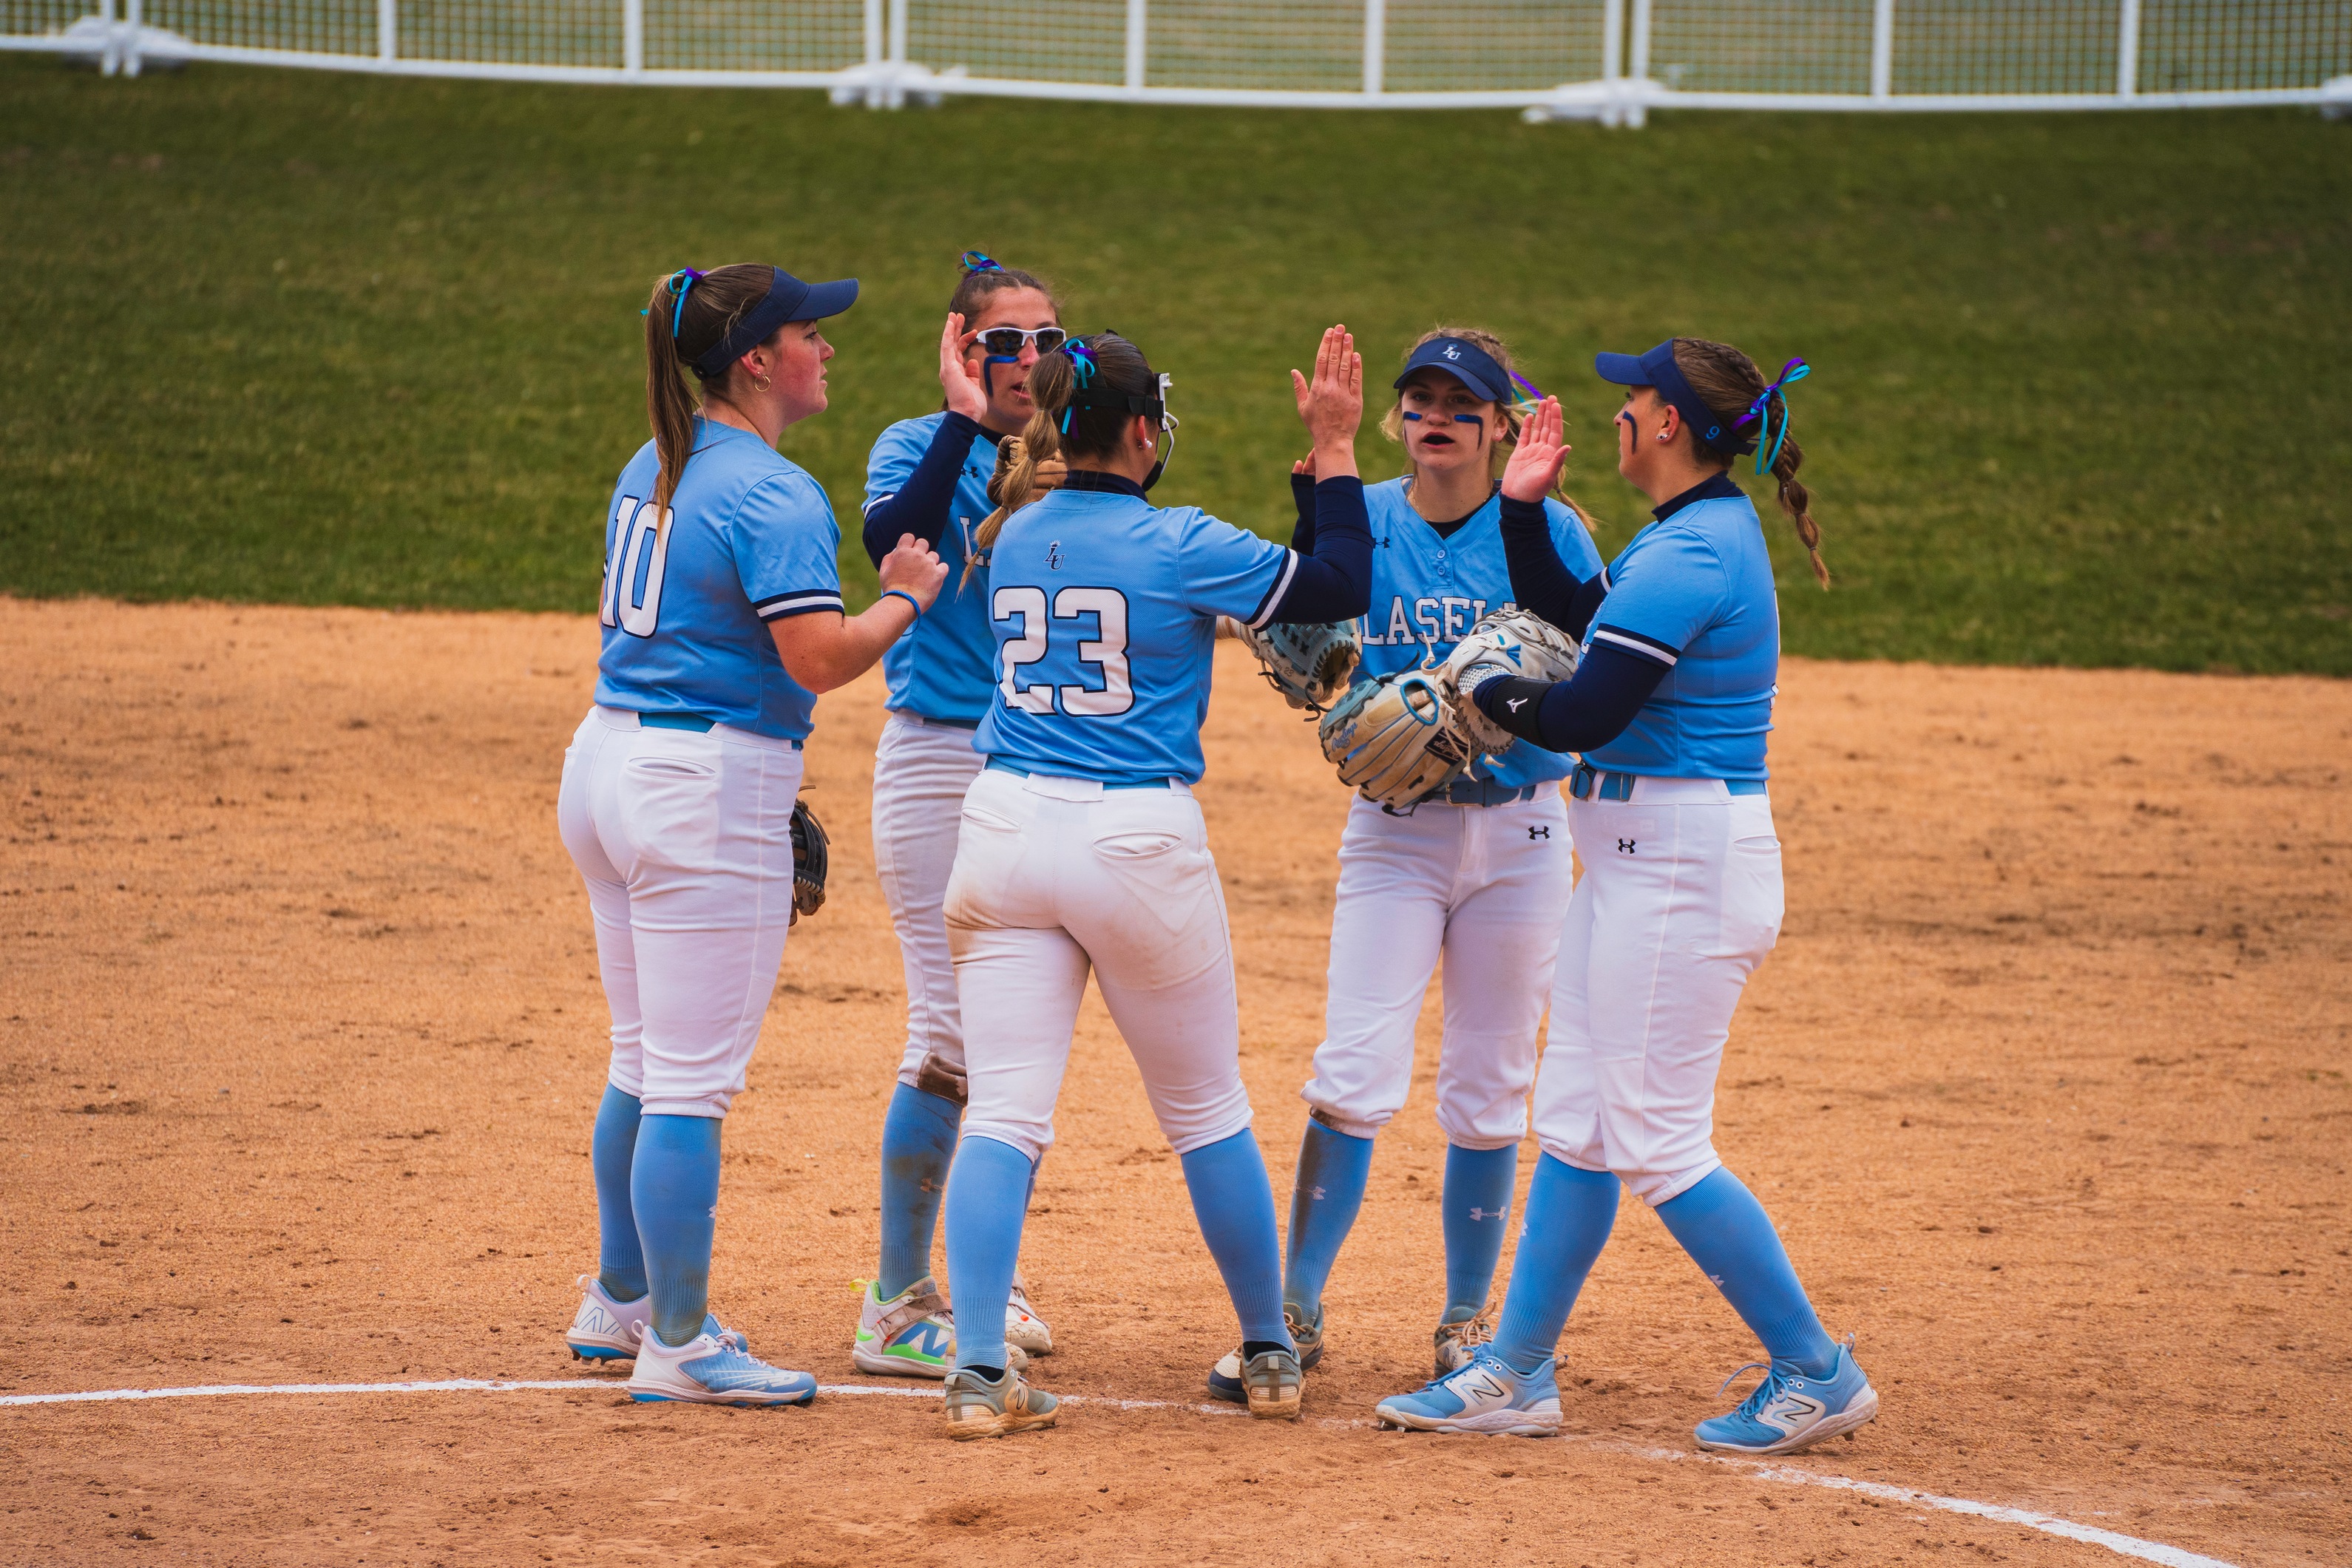 SB: Quiet Bats Lead to Doubleheader Loss for Lasers